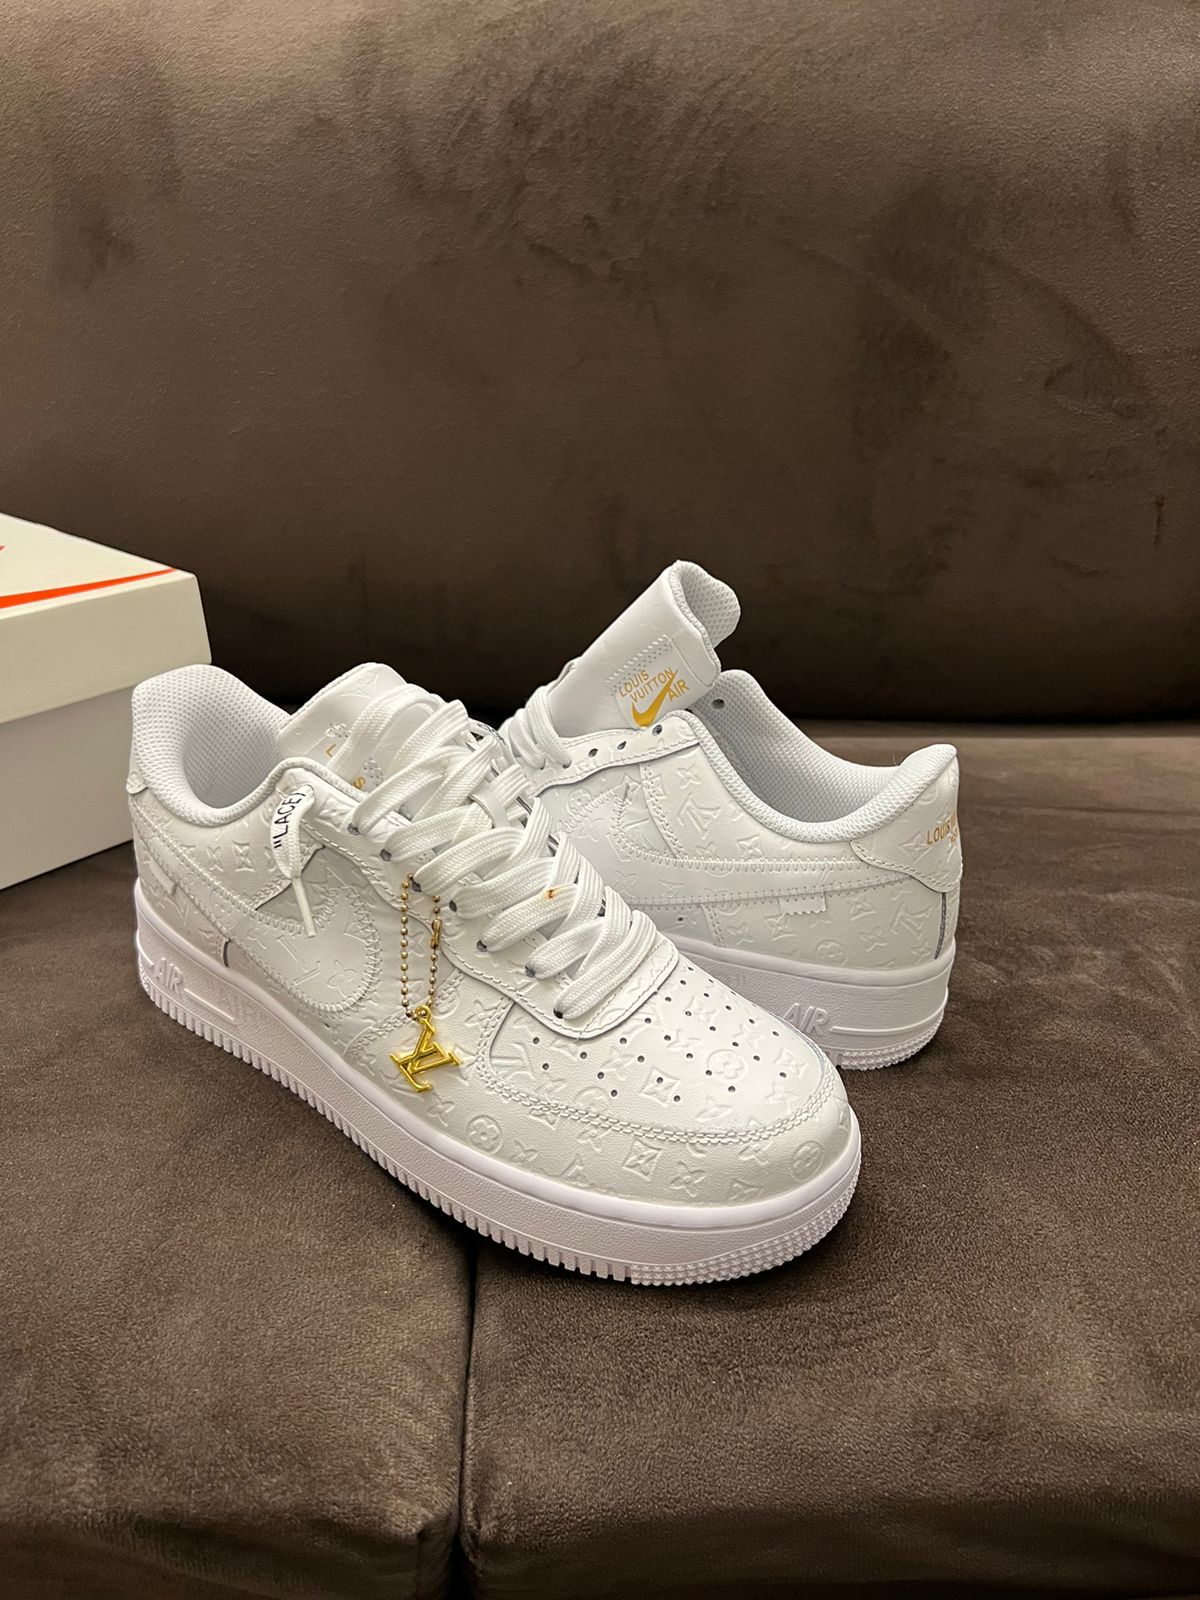 First copy Nike Airforce X LV Shoes Premium quality sneakers